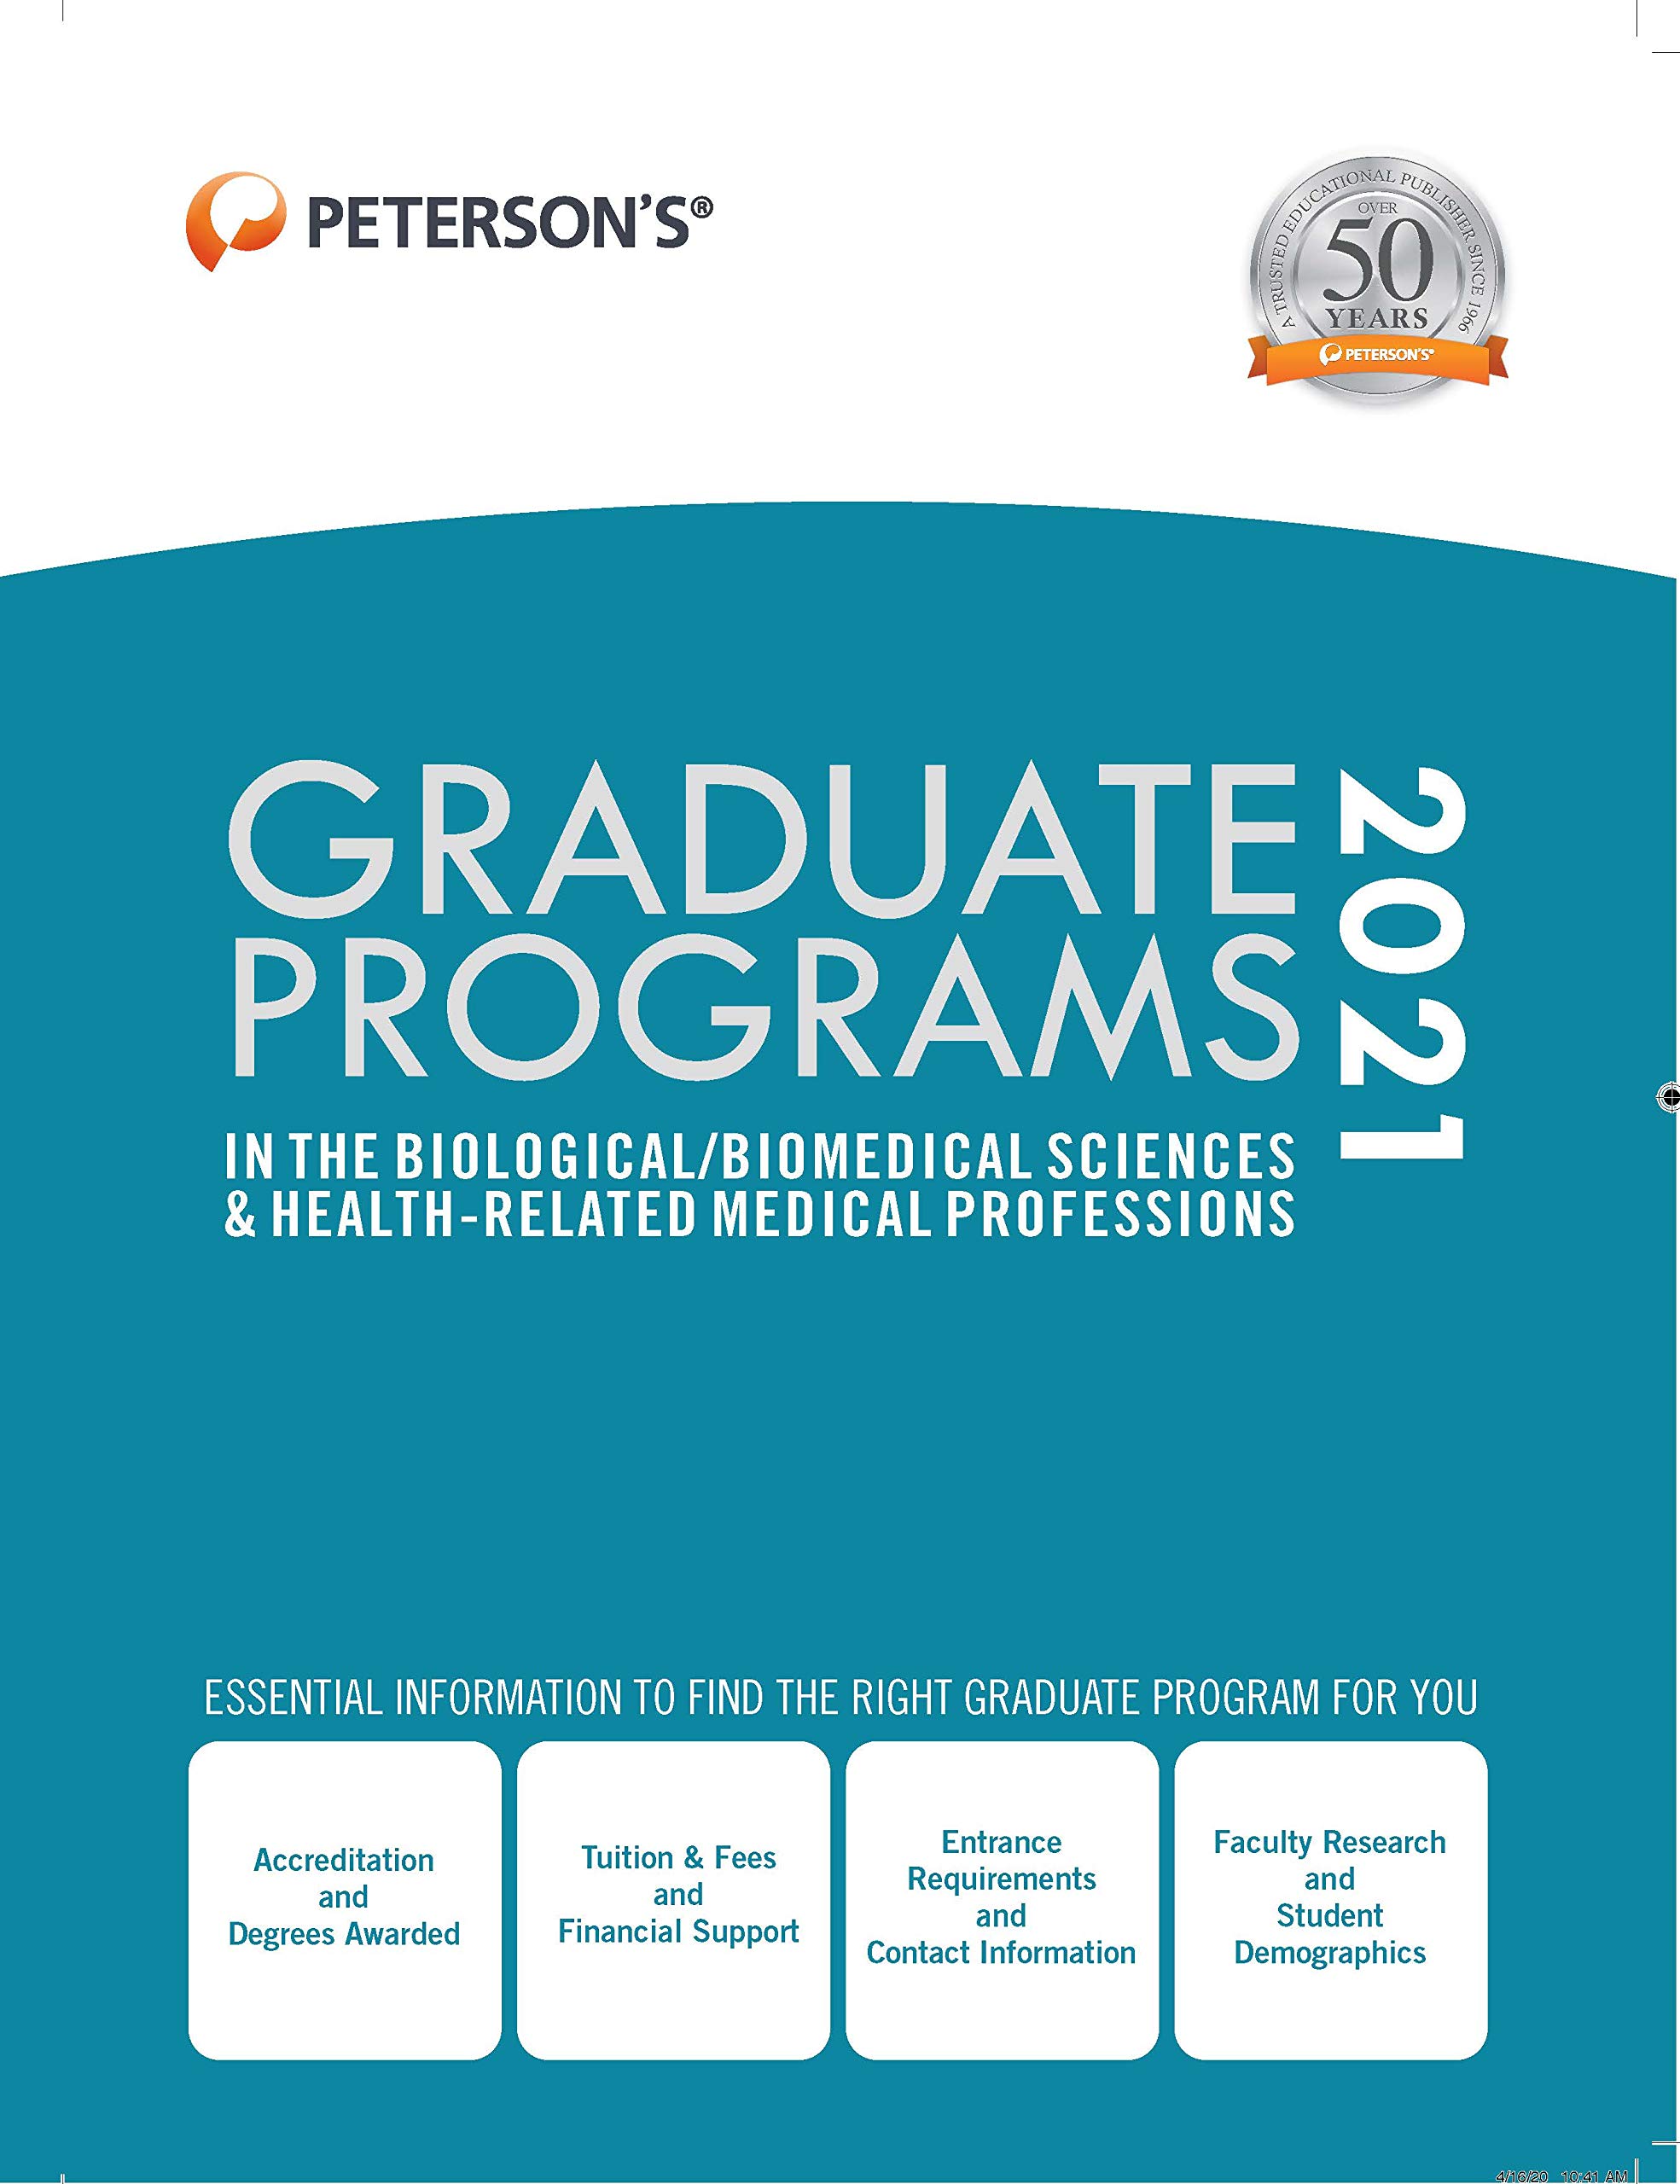 Peterson's Graduate Programs in the Biological/Biomedical Sciences & Health-Related Medical Professions 2021